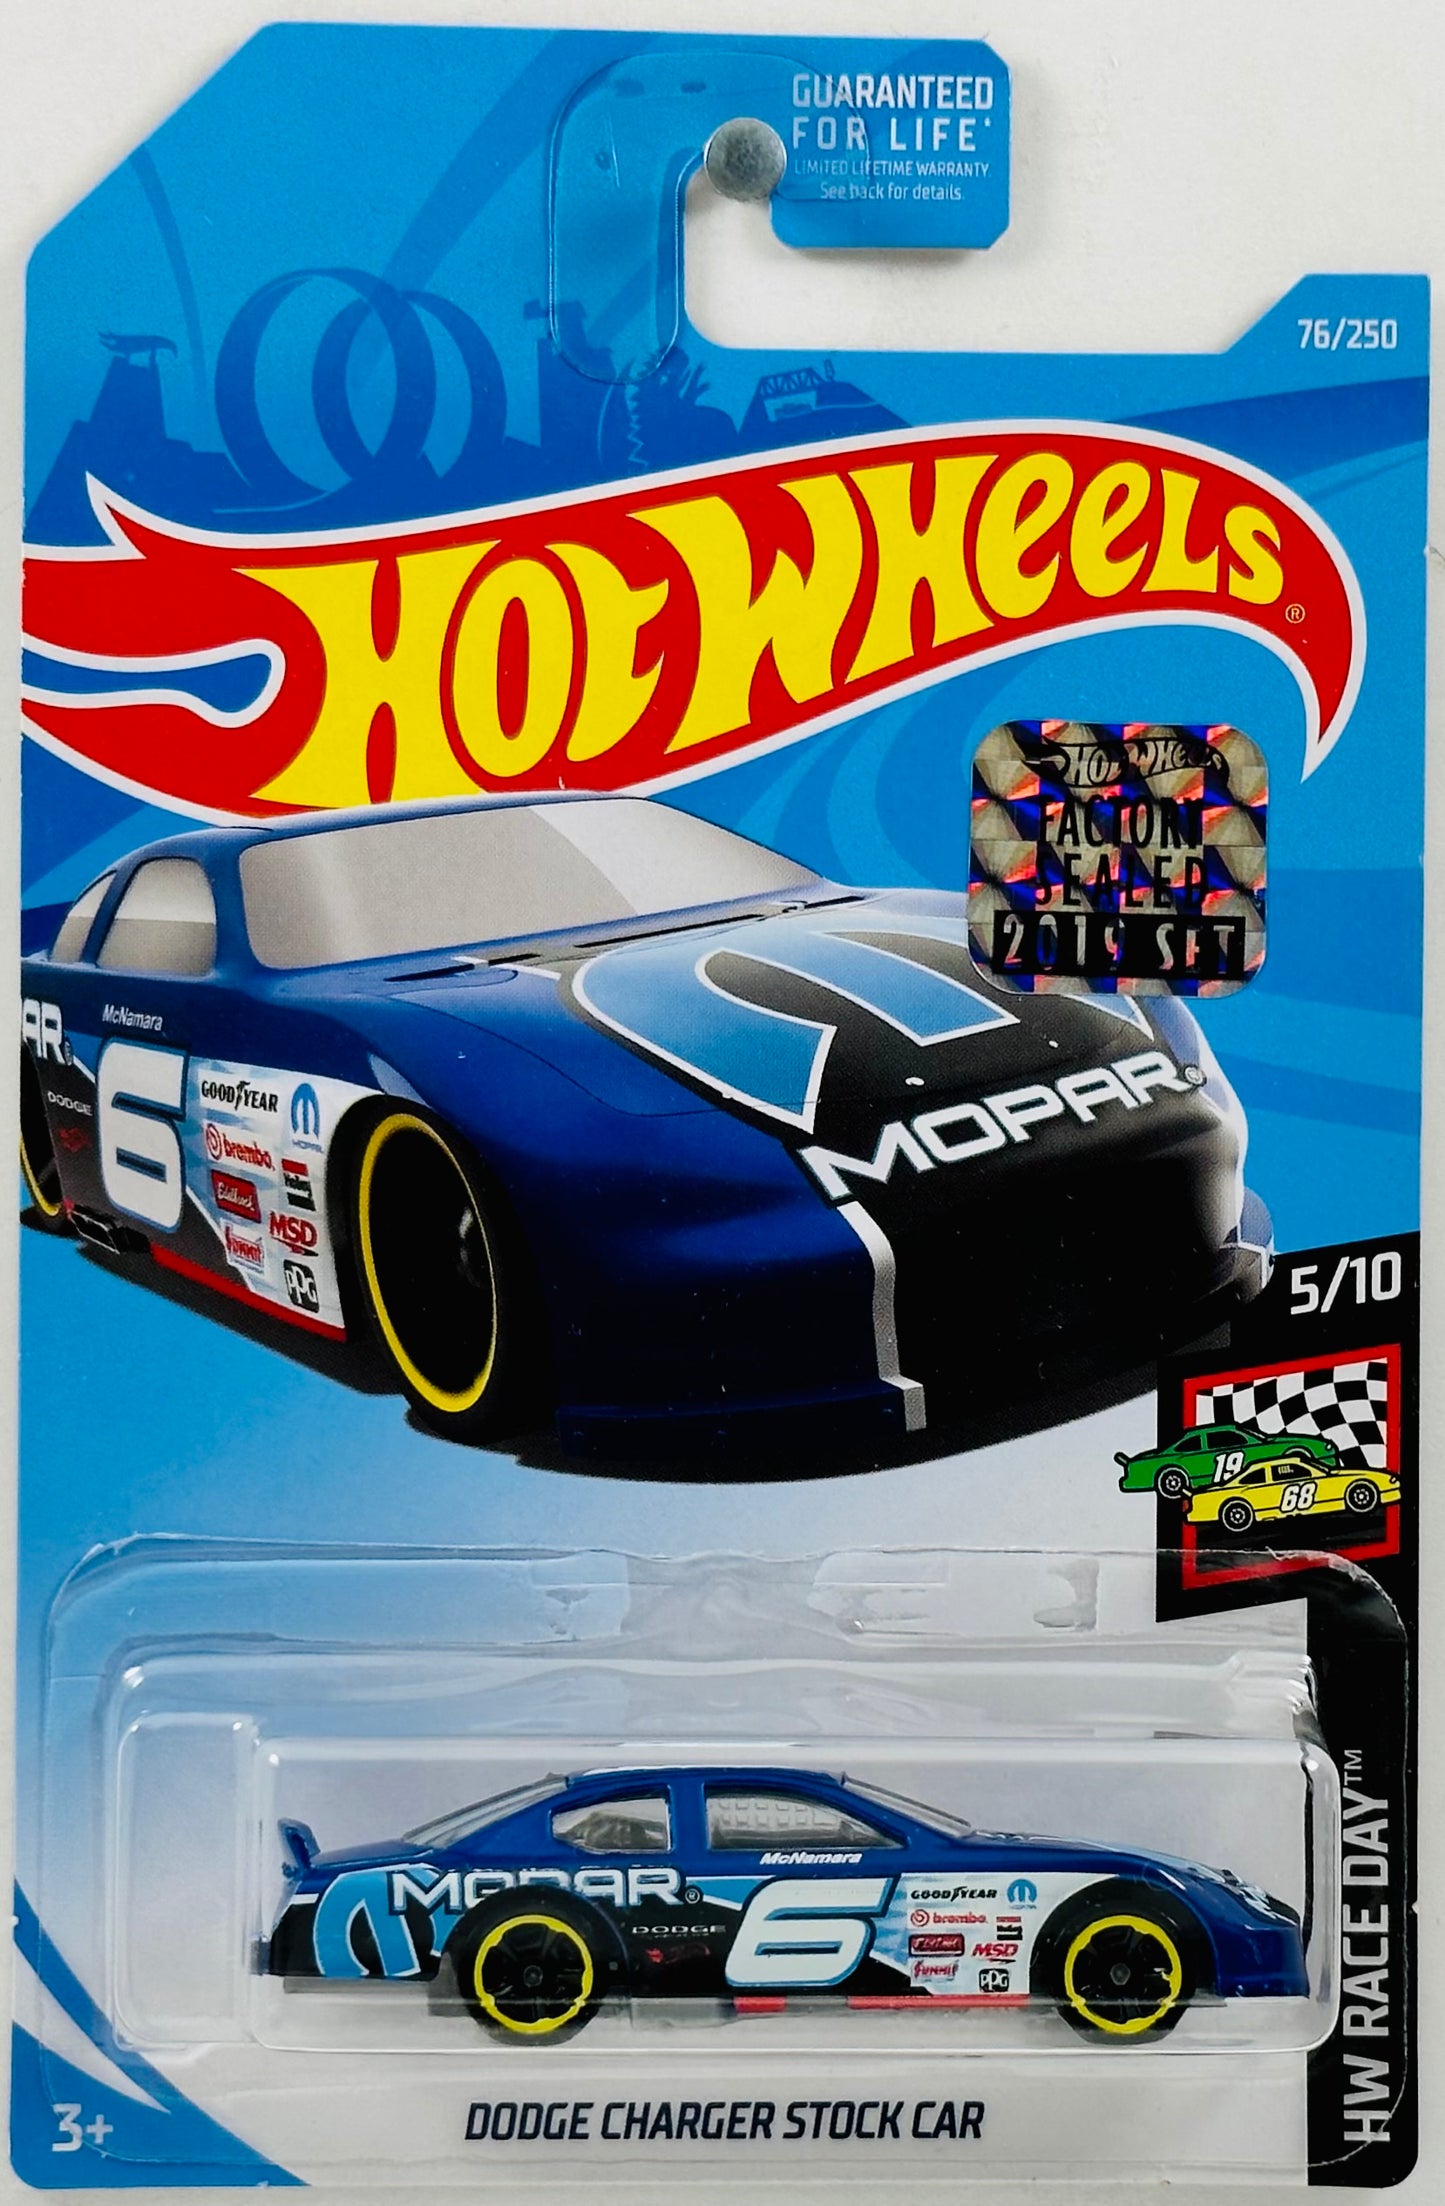 Hot Wheels 2019 - Collector # 076/250 - HW Race Day 5/10 - Dodge Charger Stock Car - Blue - FSC